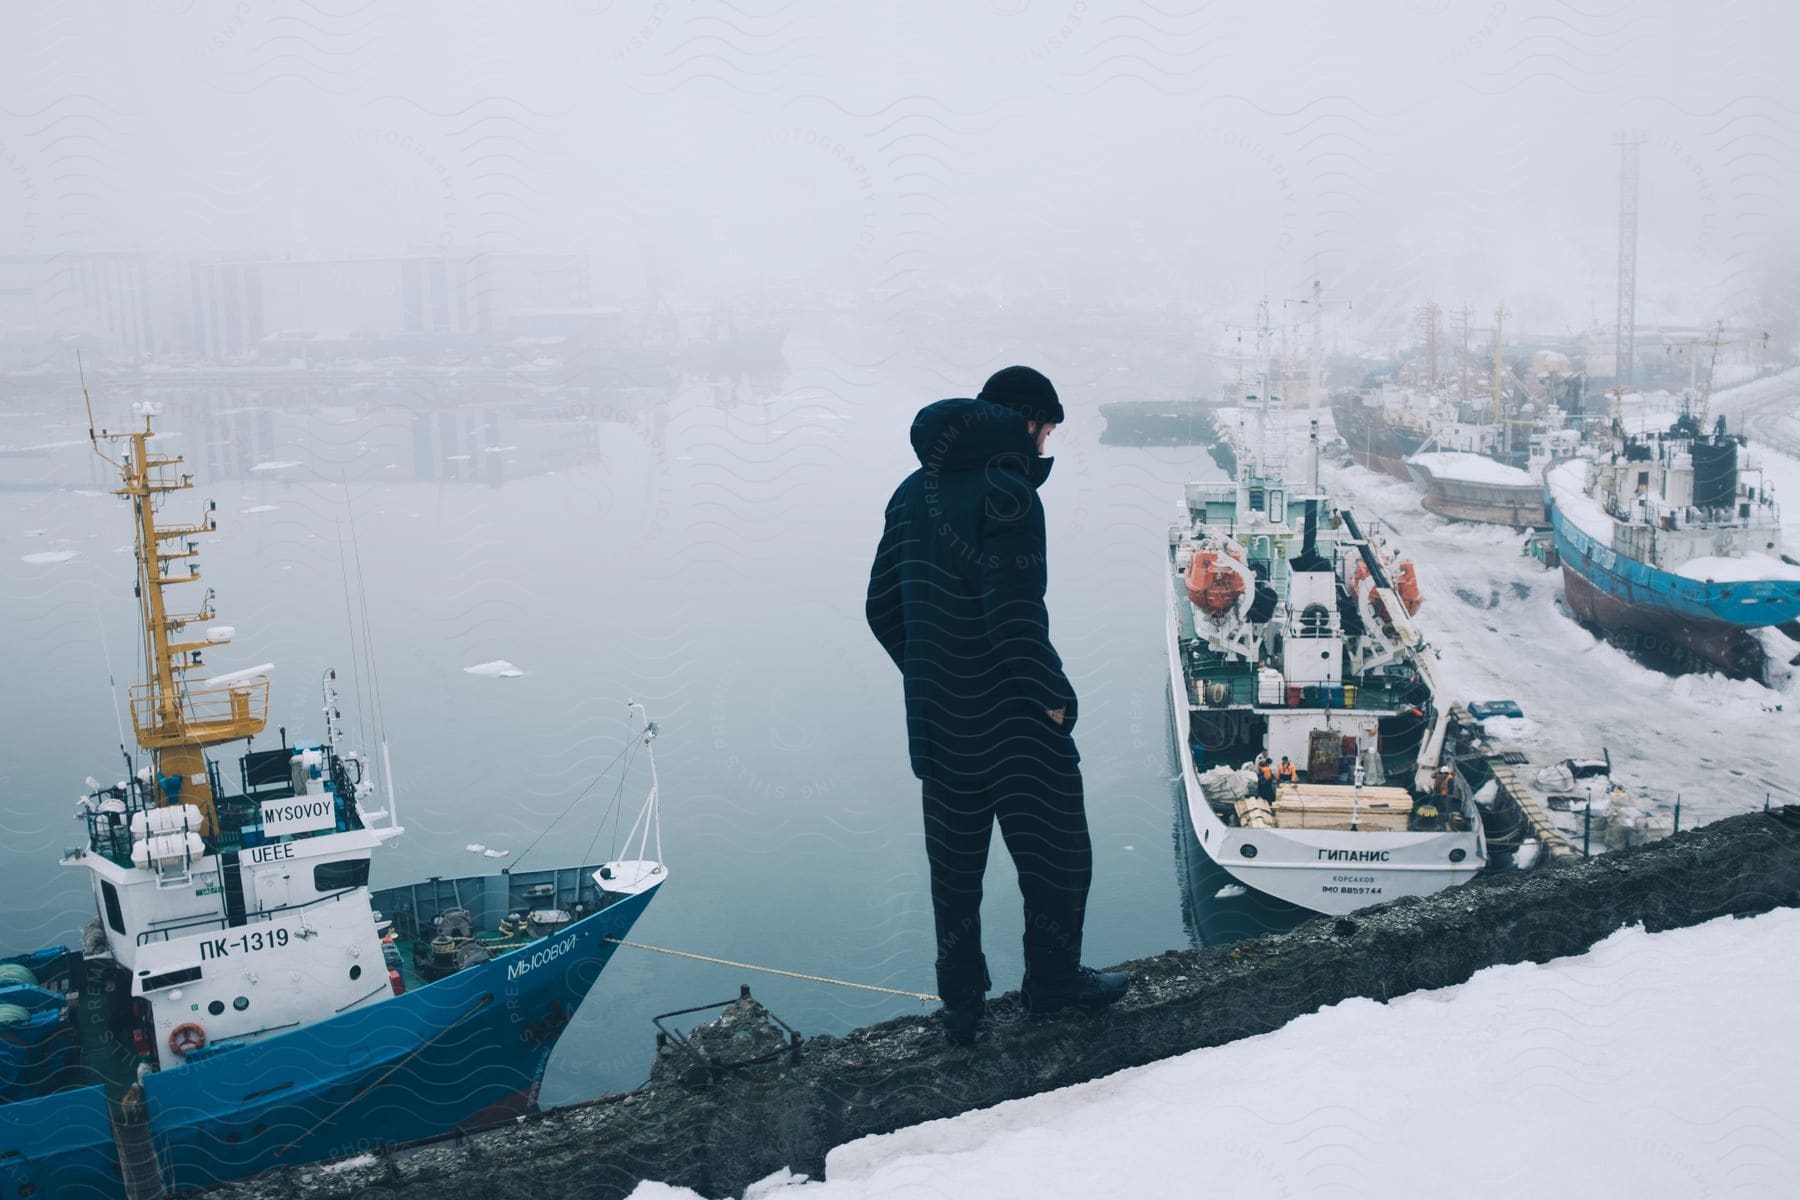 A sailor observes icy harbor waters during winter